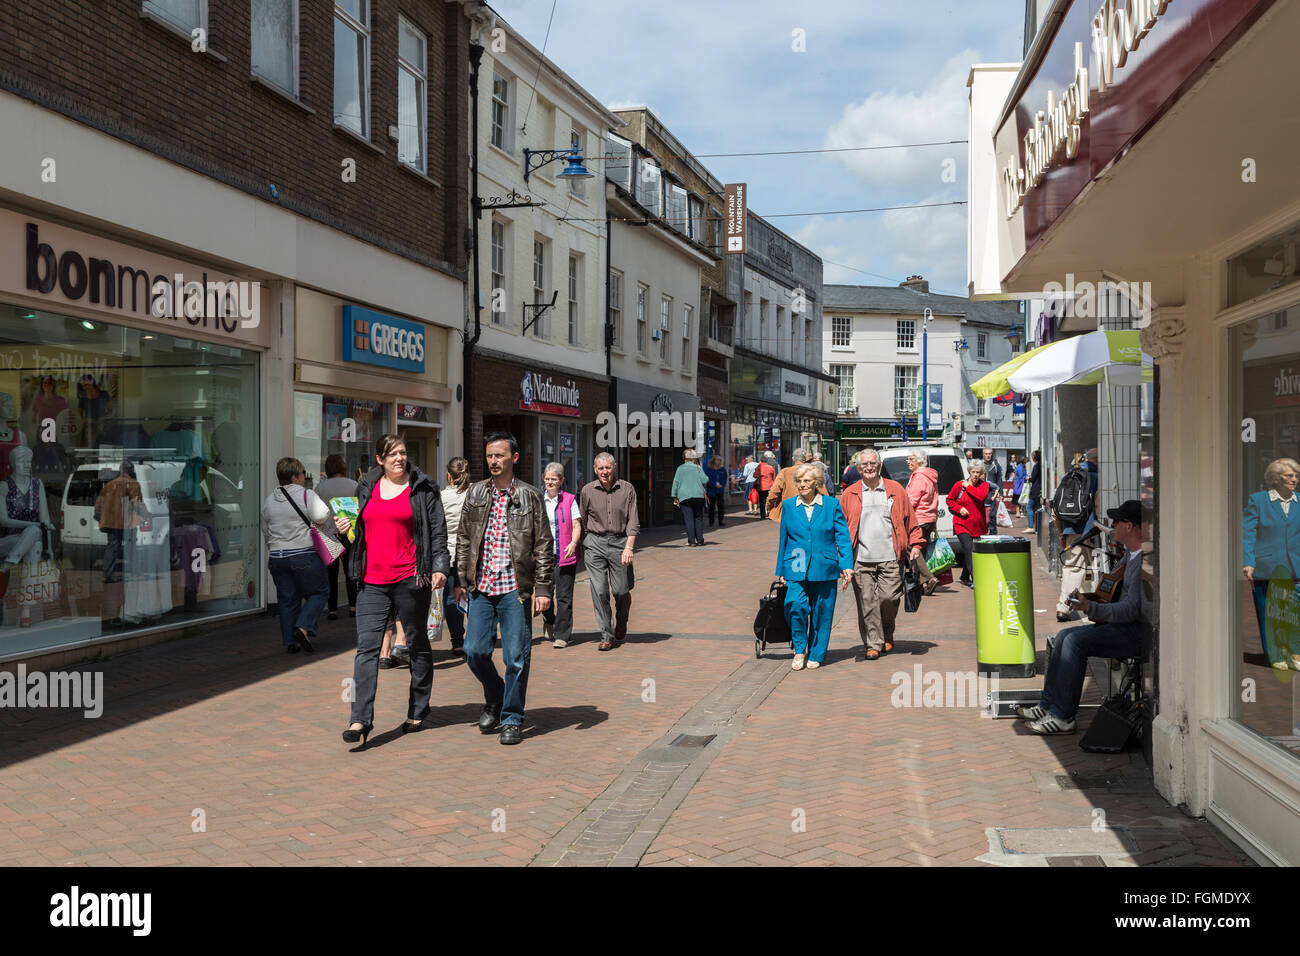 Pedestrianised shopping street in town centre, Abergavenny, Wales, UK Stock Photo